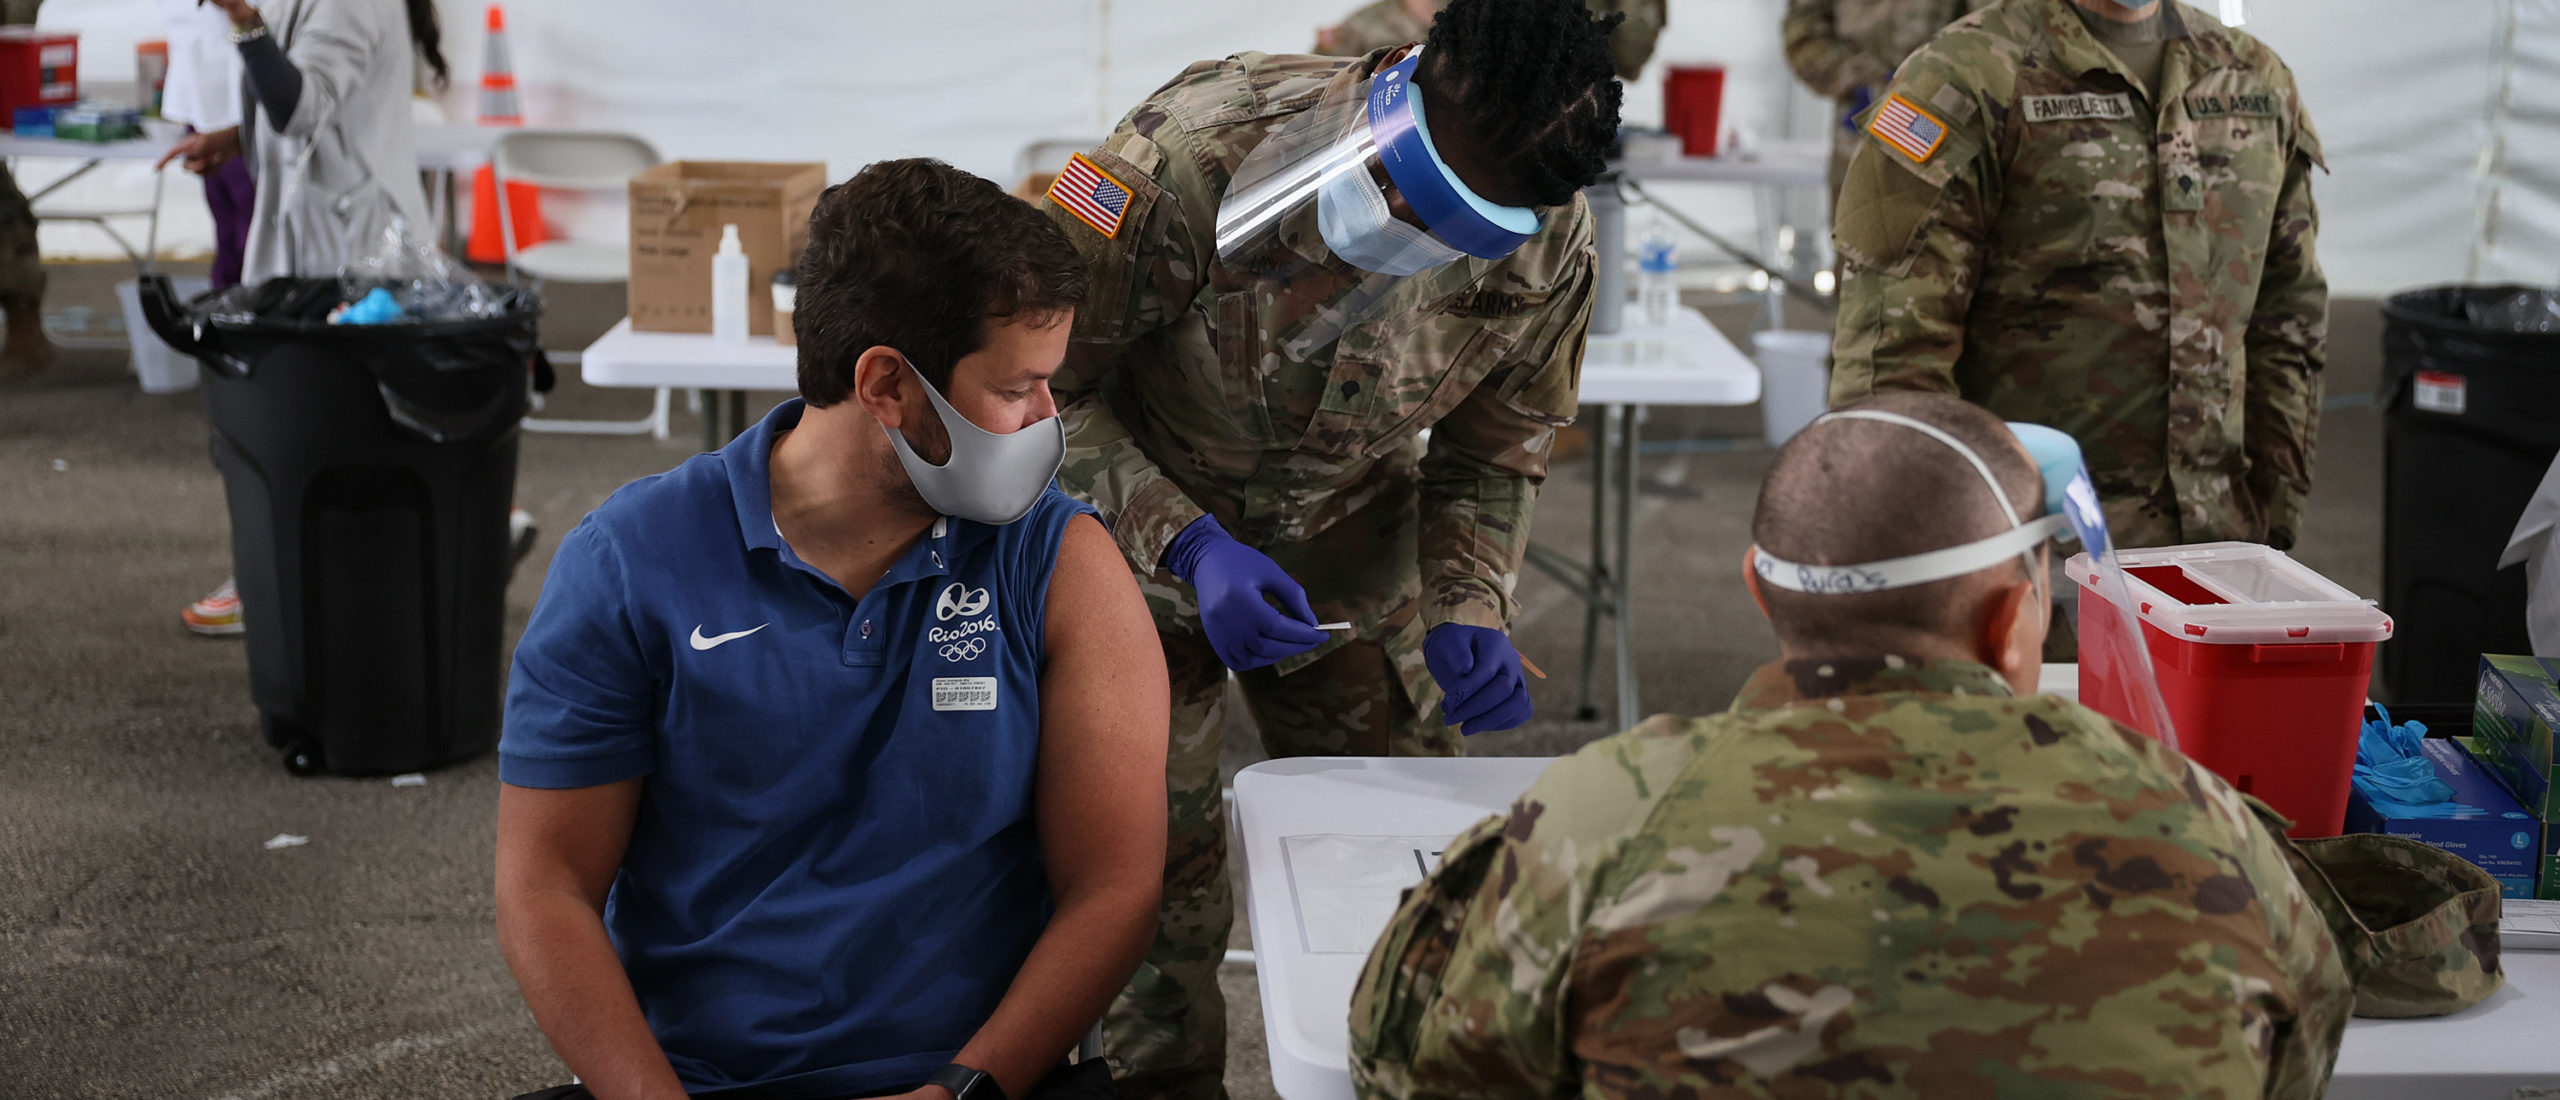 An Army soldier from the 2nd Armored Brigade Combat Team, 1st Infantry Division, helps give COVID-19 vaccinations at the Miami Dade College North Campus on March 09, 2021. (Joe Raedle/Getty Images)